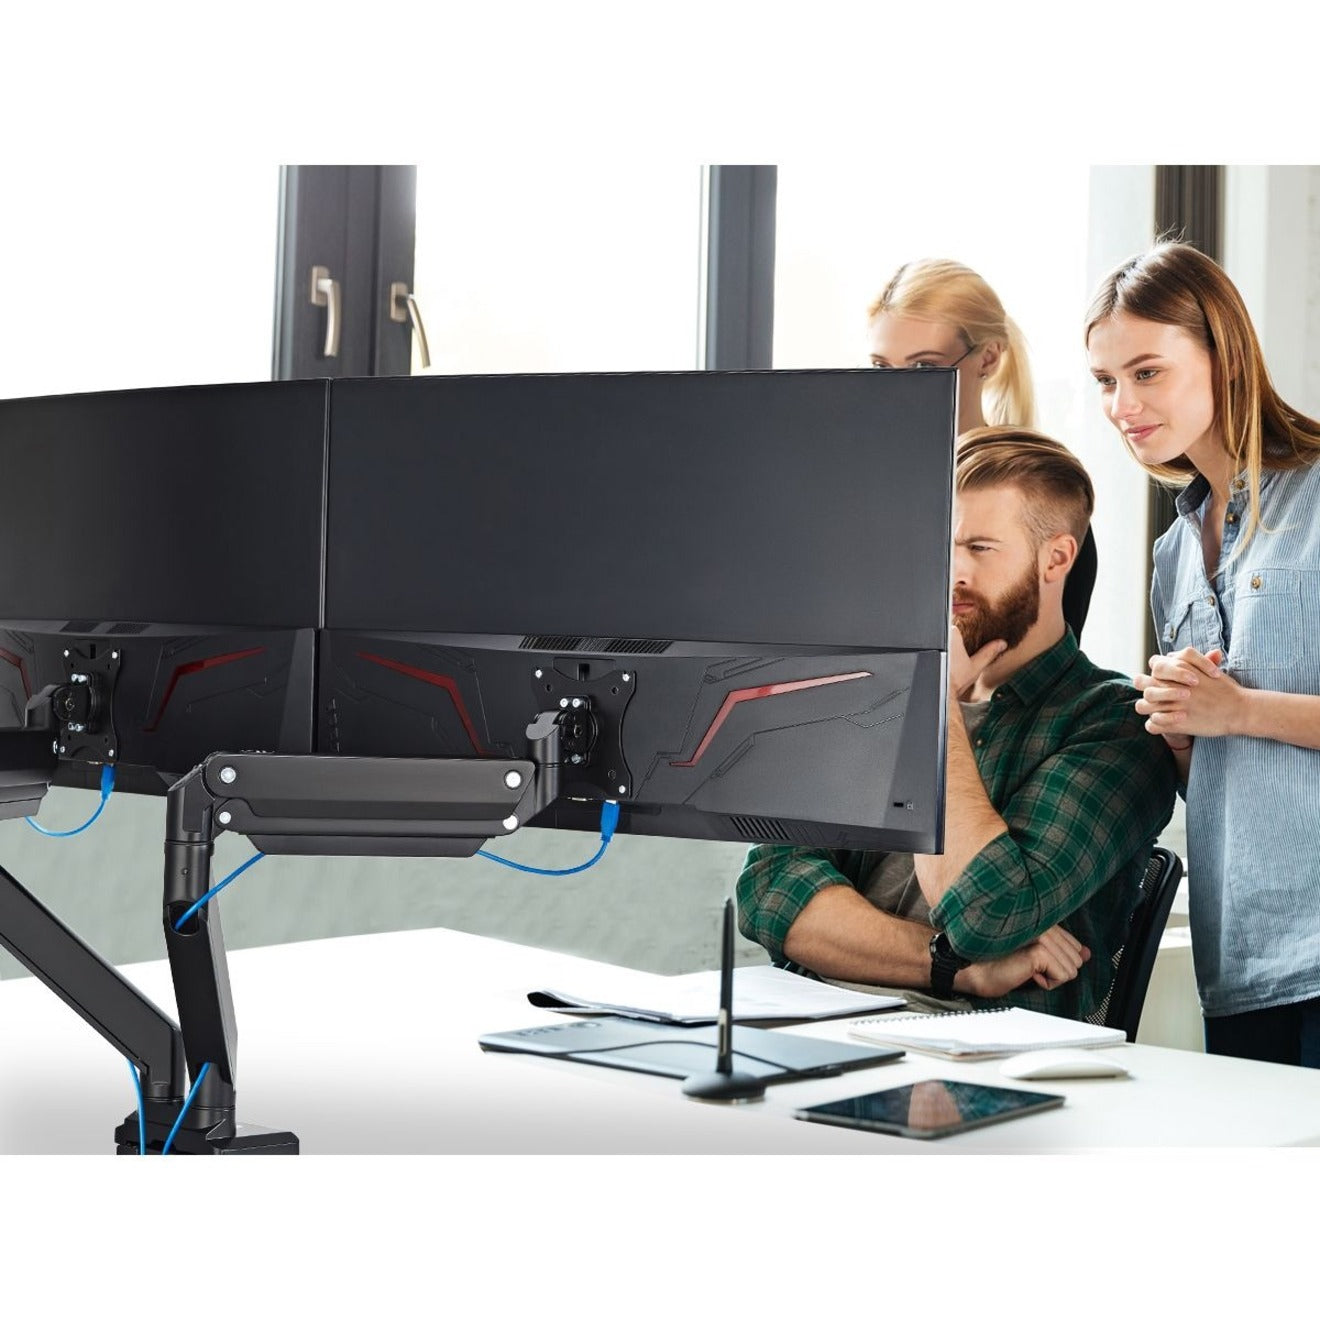 SIIG CE-MT3011-S1 Dual Monitor Heavy-Duty Premium Aluminum Gas Spring Desk Mount - 35", Ergonomic and Space-Saving Solution for Dual Monitor Setup